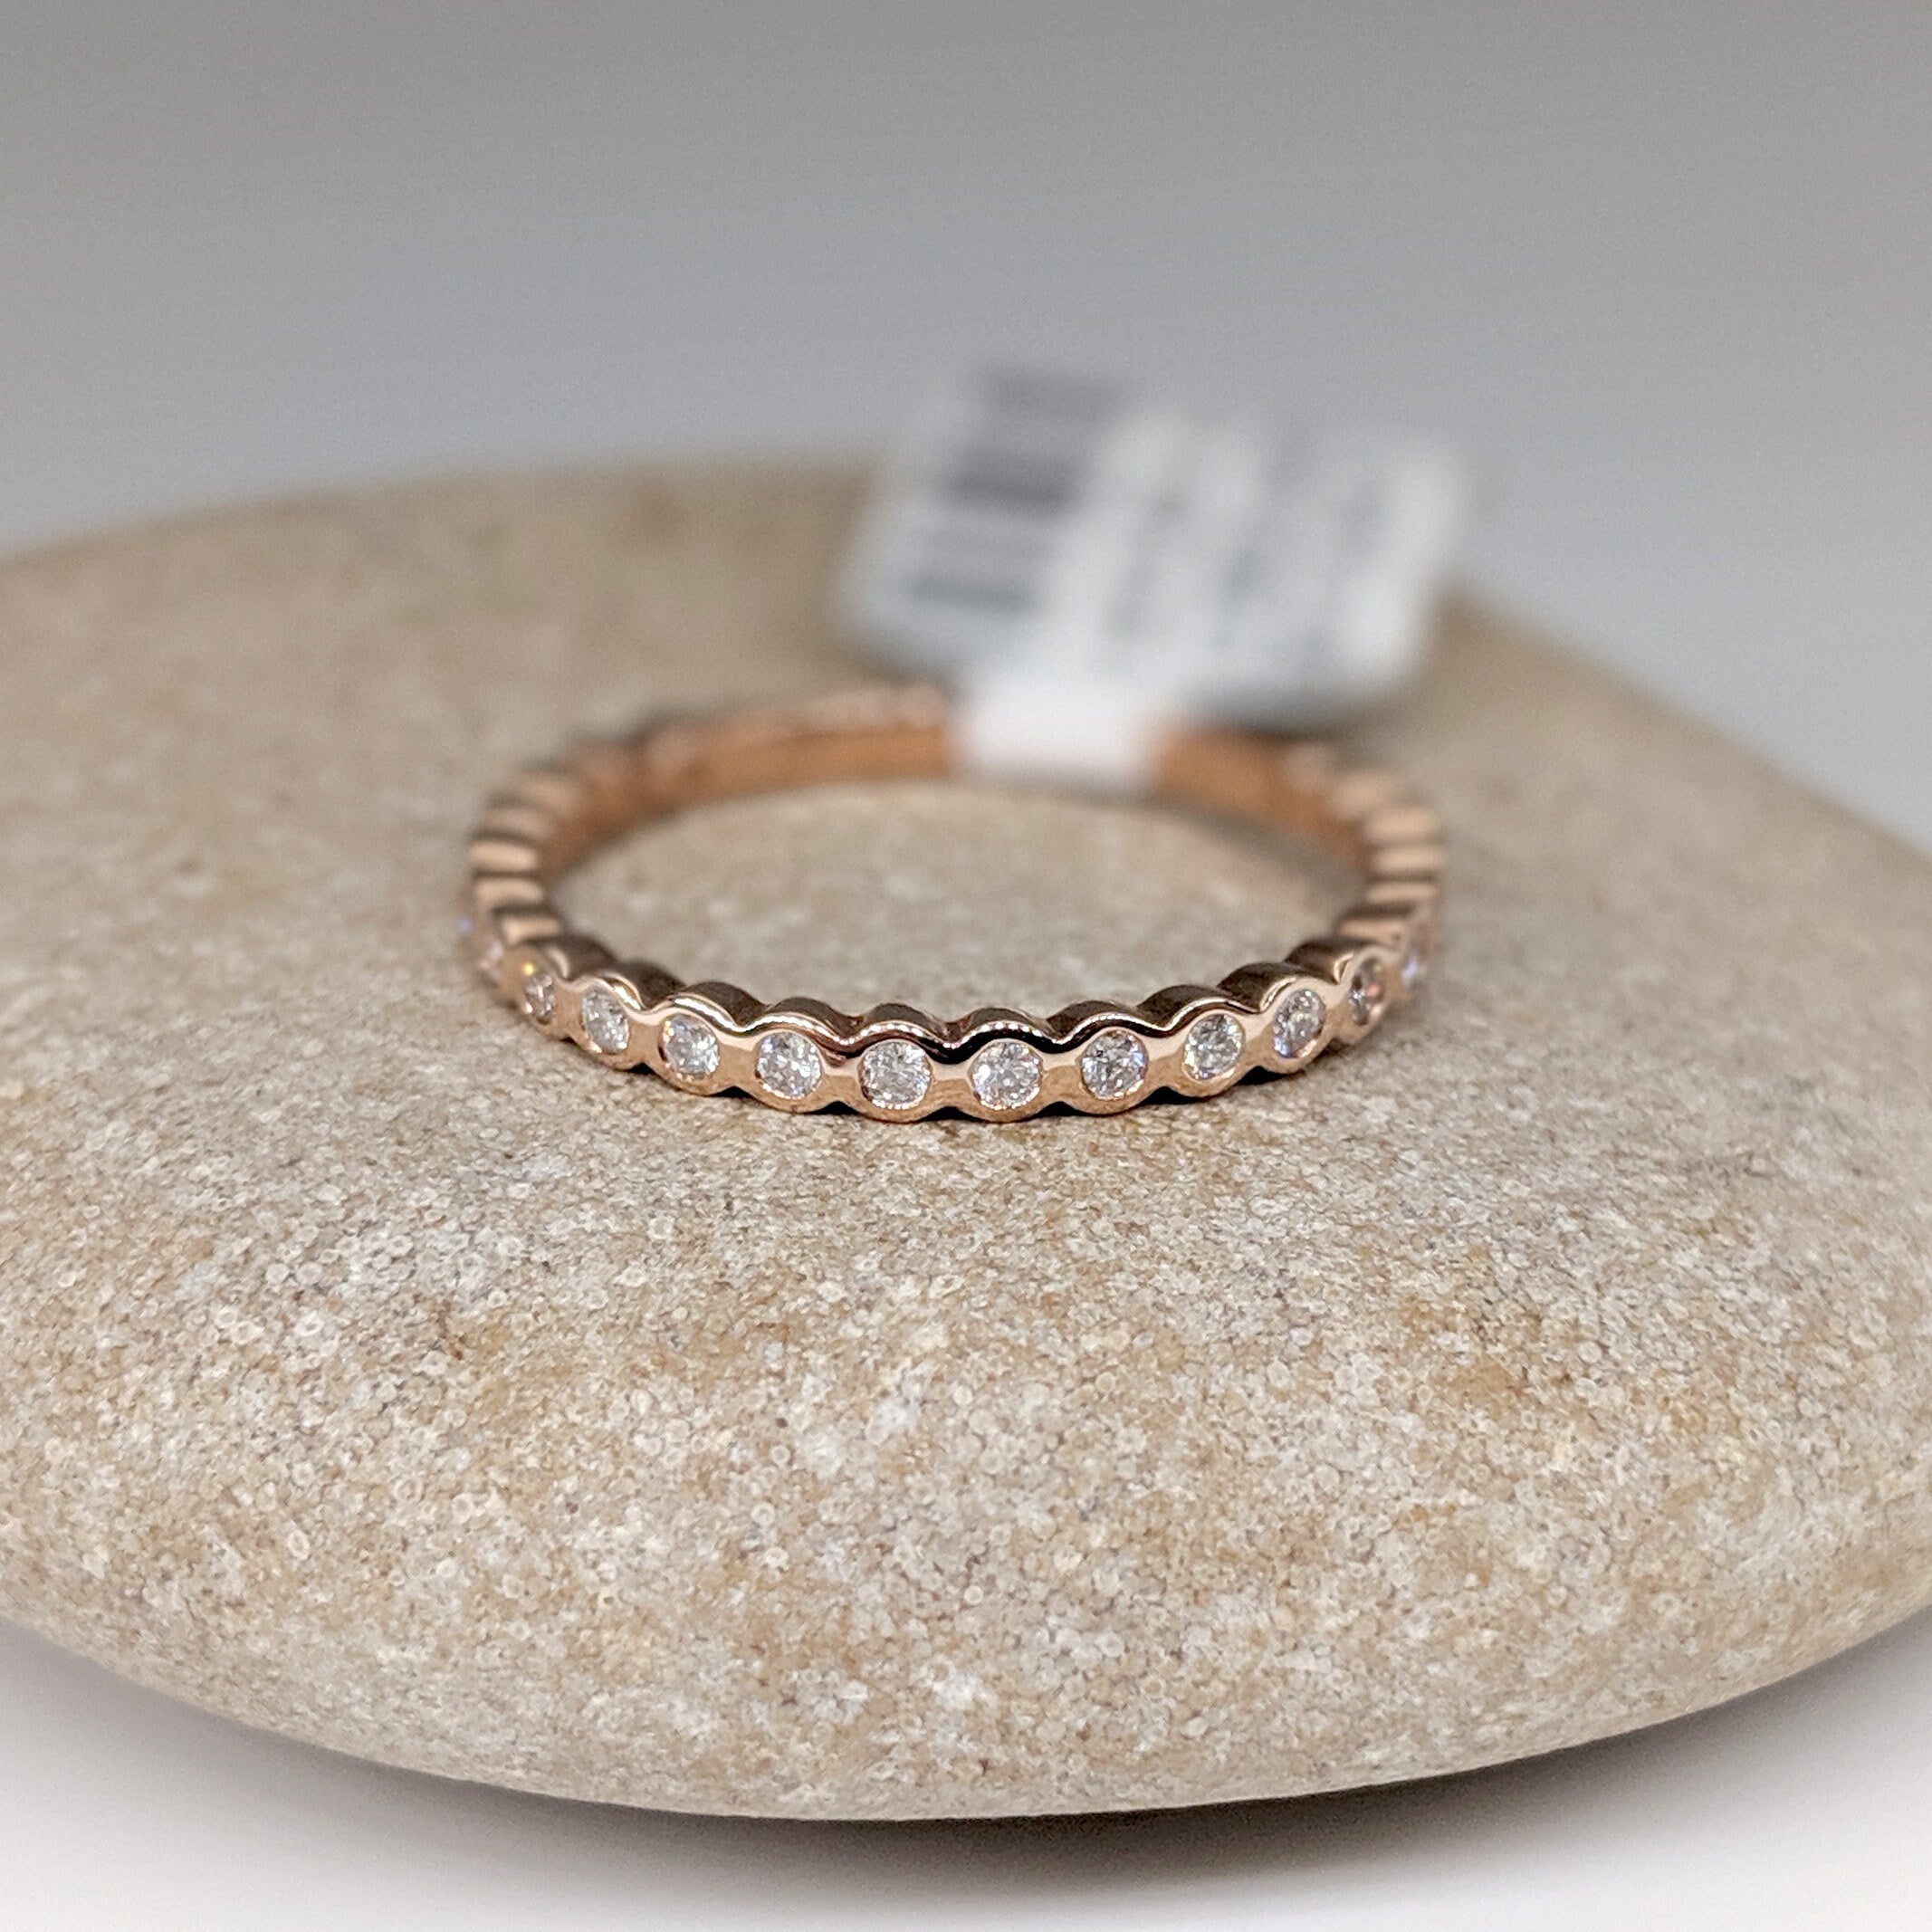 Bezel Set Diamond Band in 14K White, Yellow or Rose Gold | Stackable Ring | Wedding Band | Engagement Band | Promise Band | Sizable